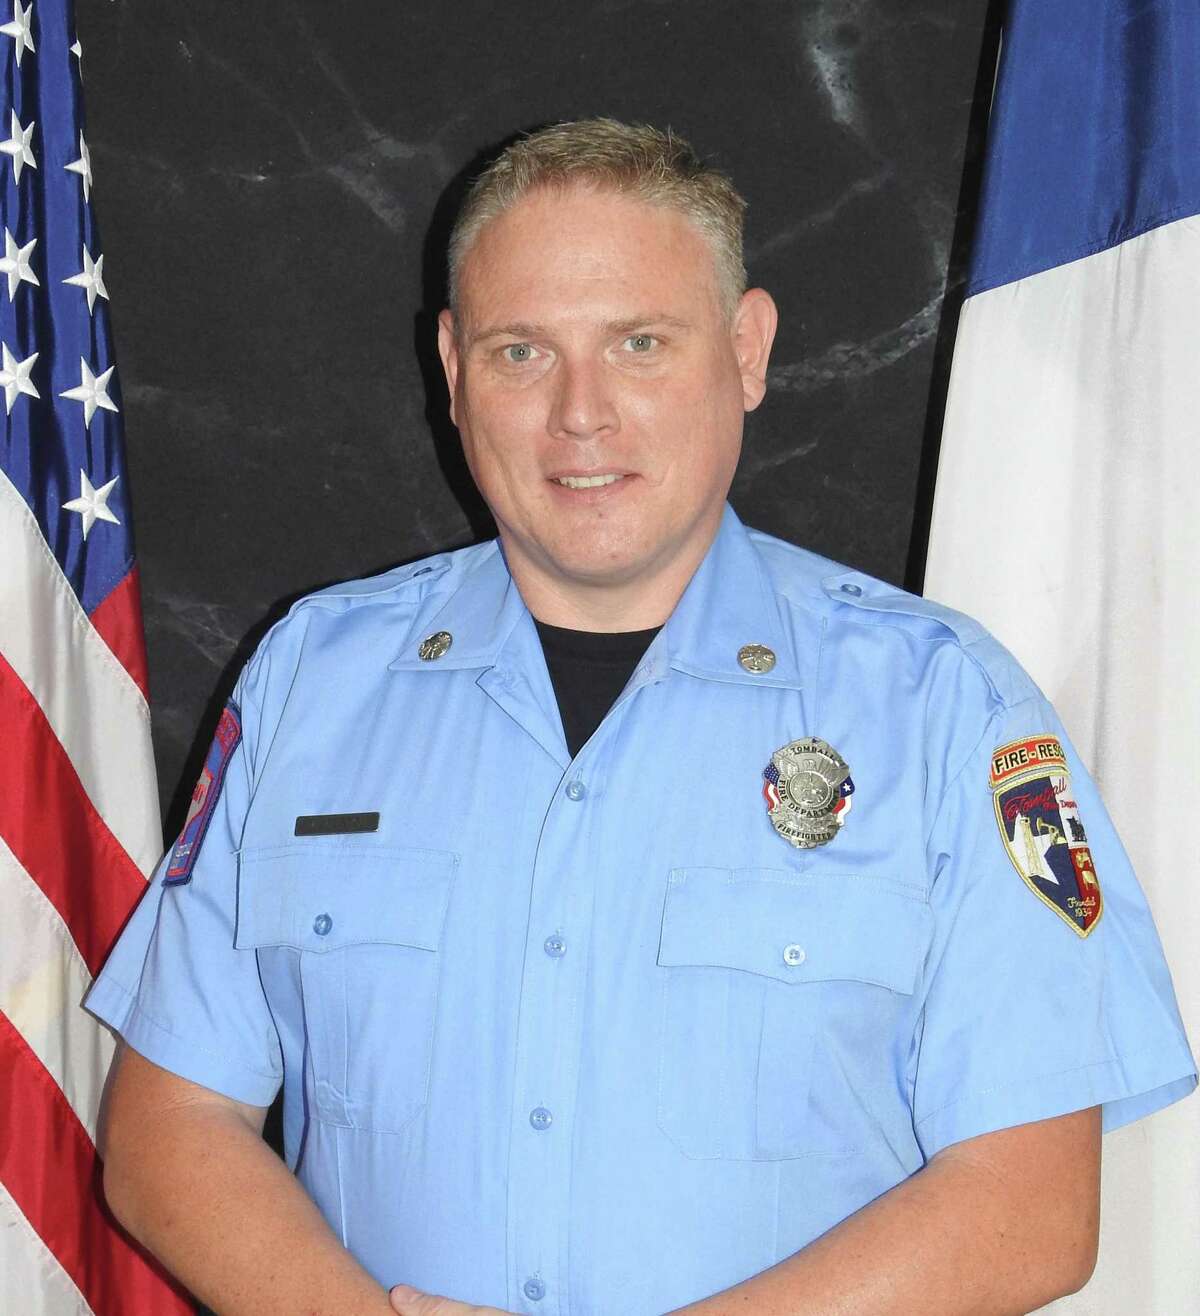 Tomball firefighter Volney "Rusty" Alston, who was killed Sunday morning in a car accident.